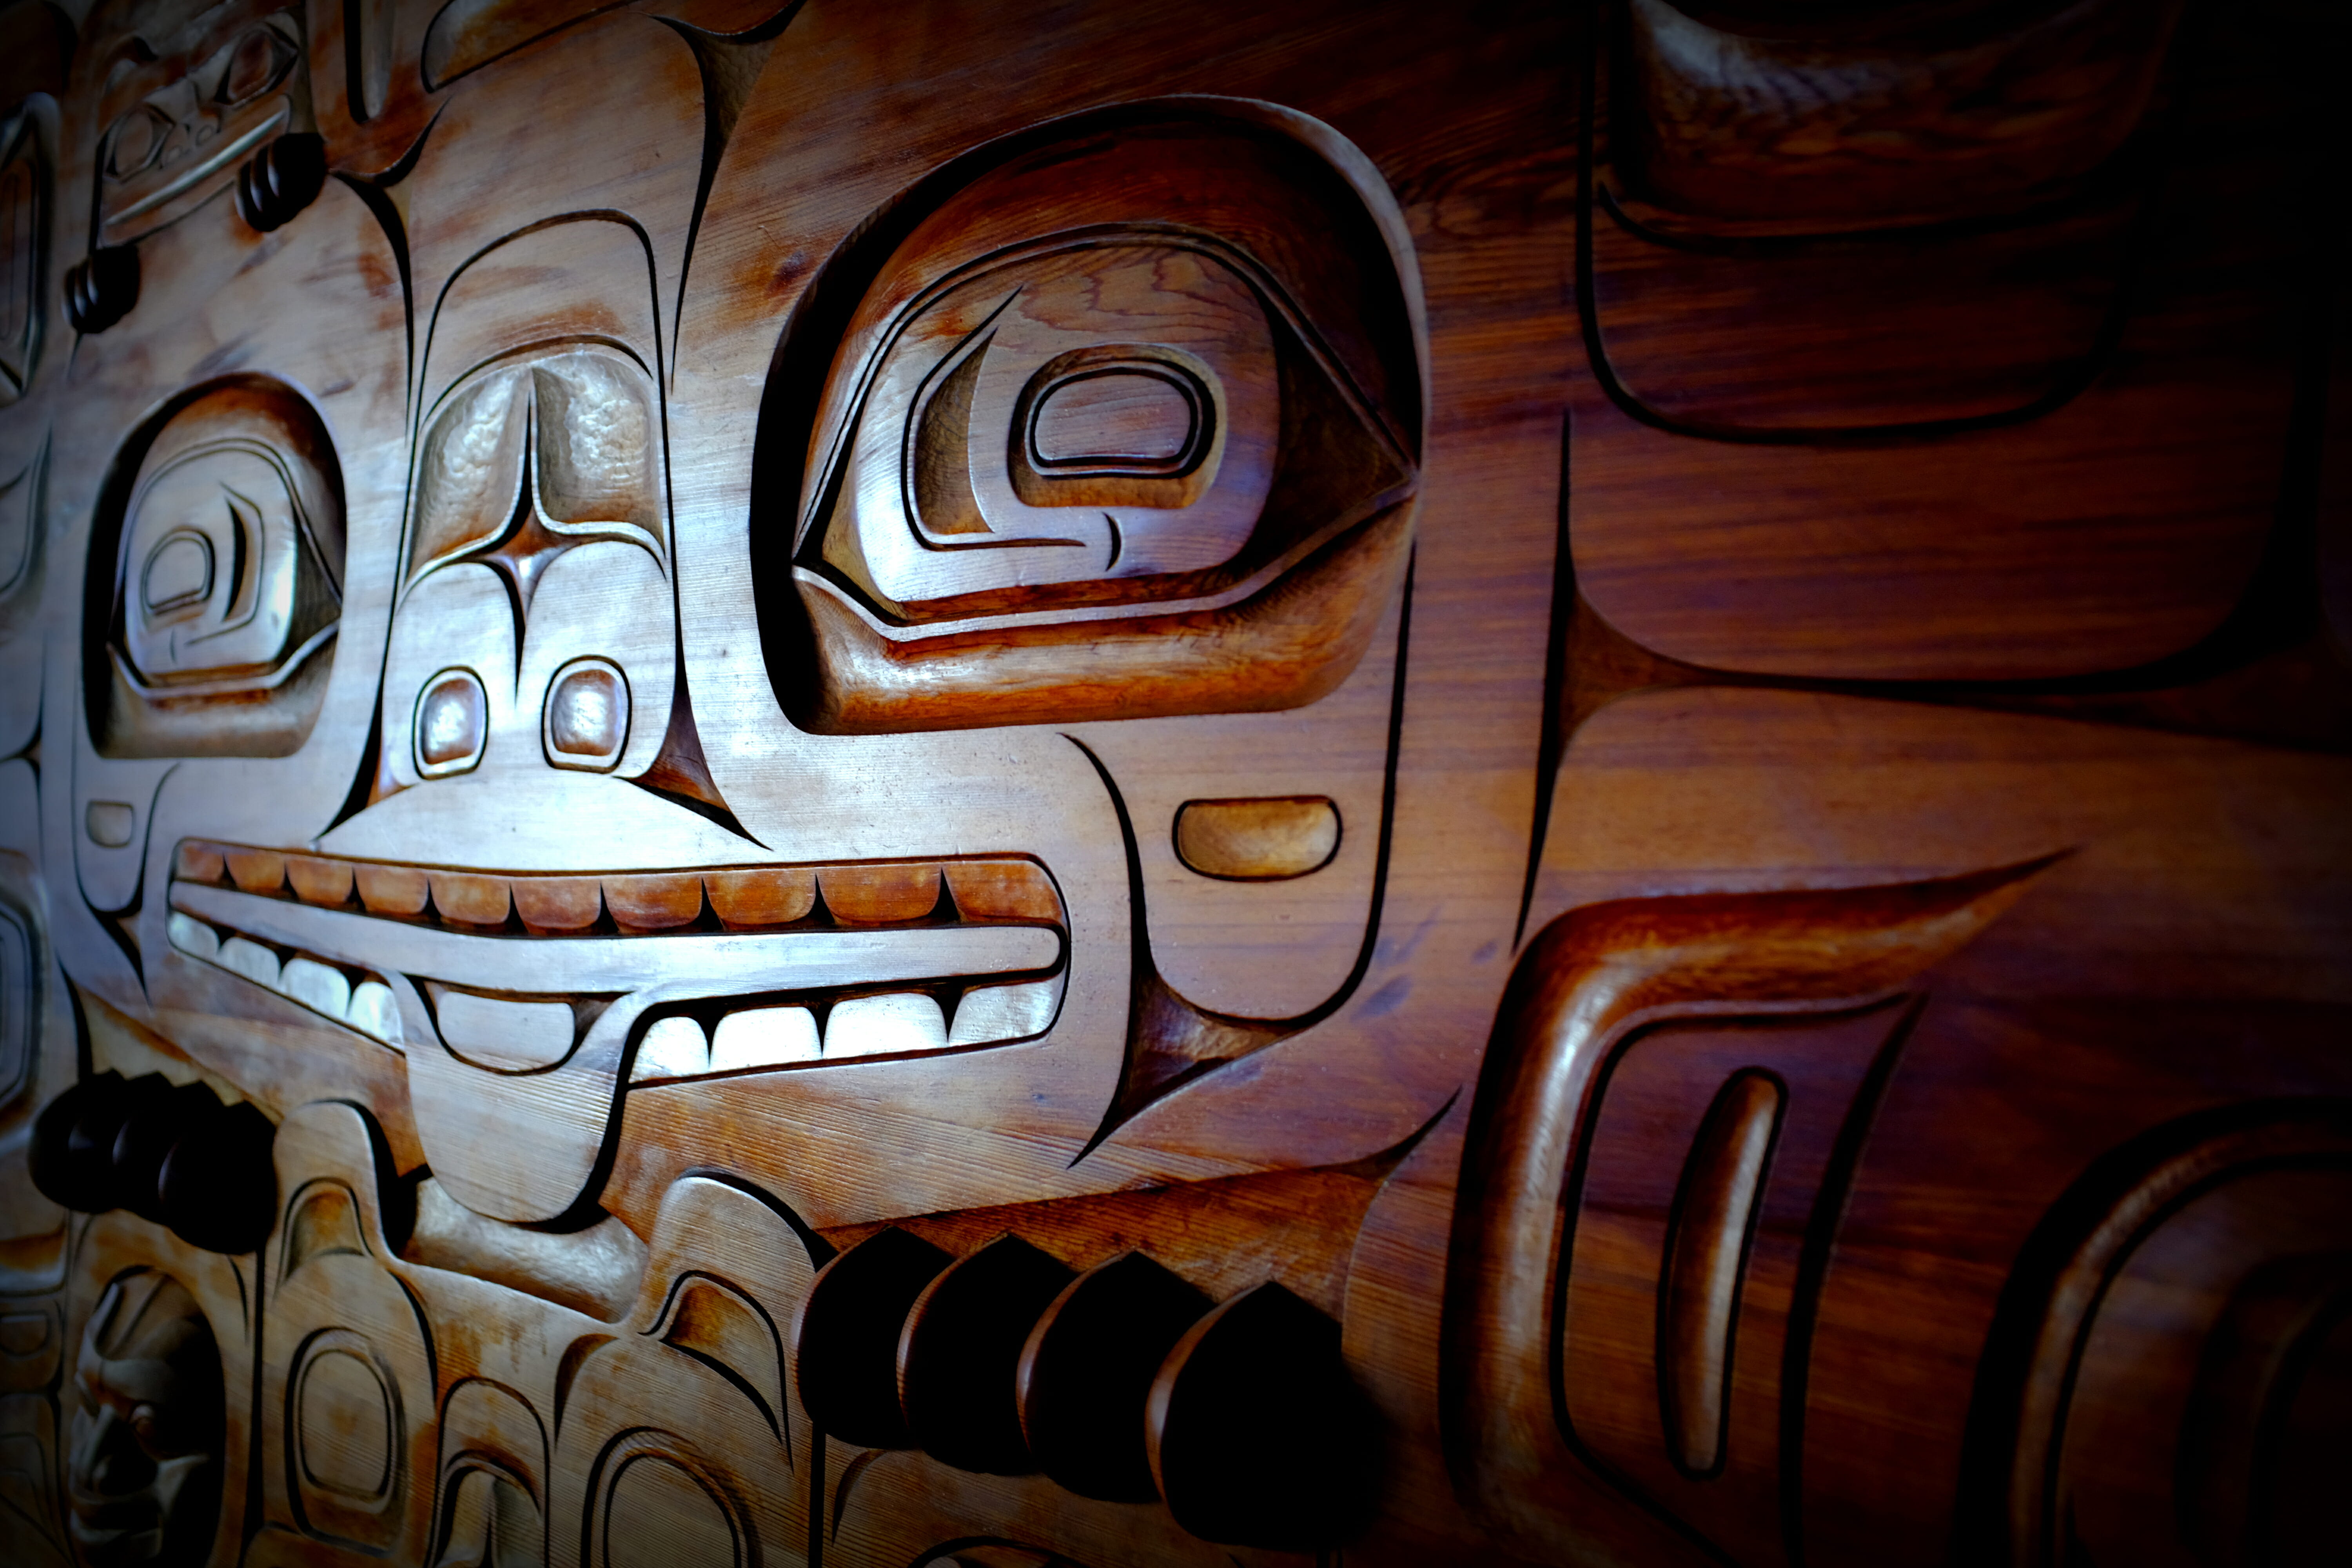 Tlingit Carved Panel behind the circulation desk at the Downtown Library